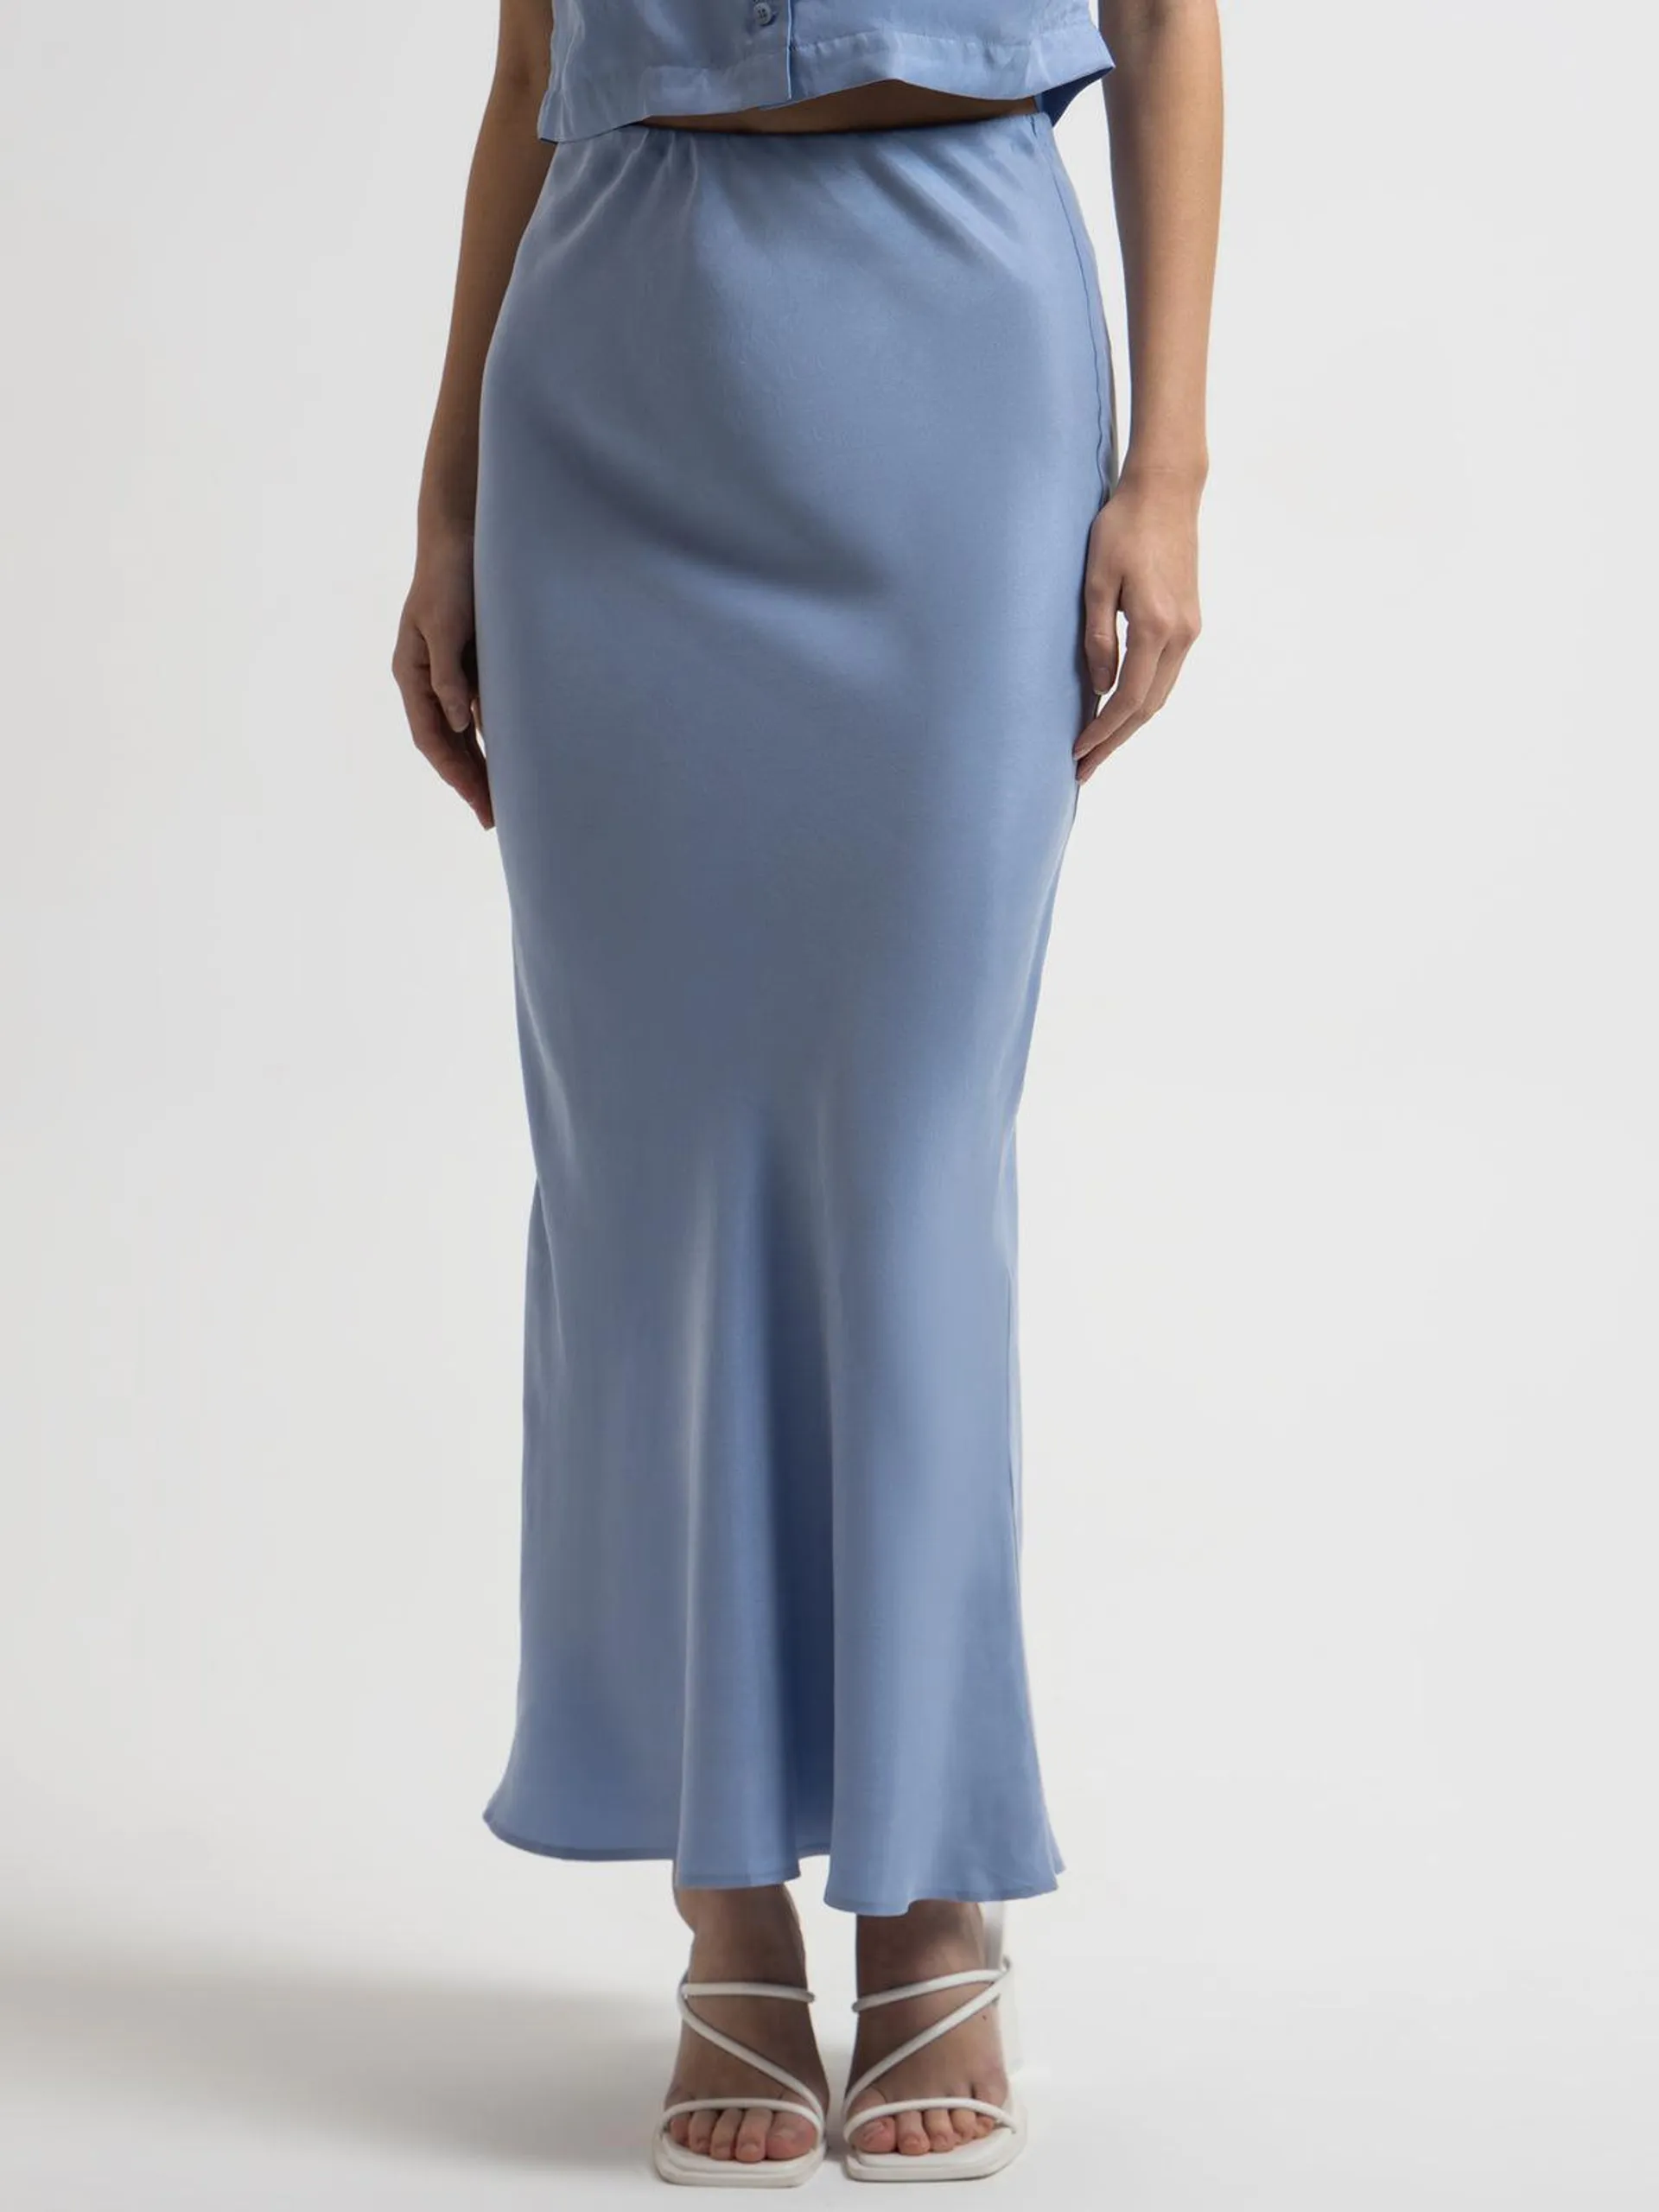 Ines Cupro Skirt in Mineral Blue